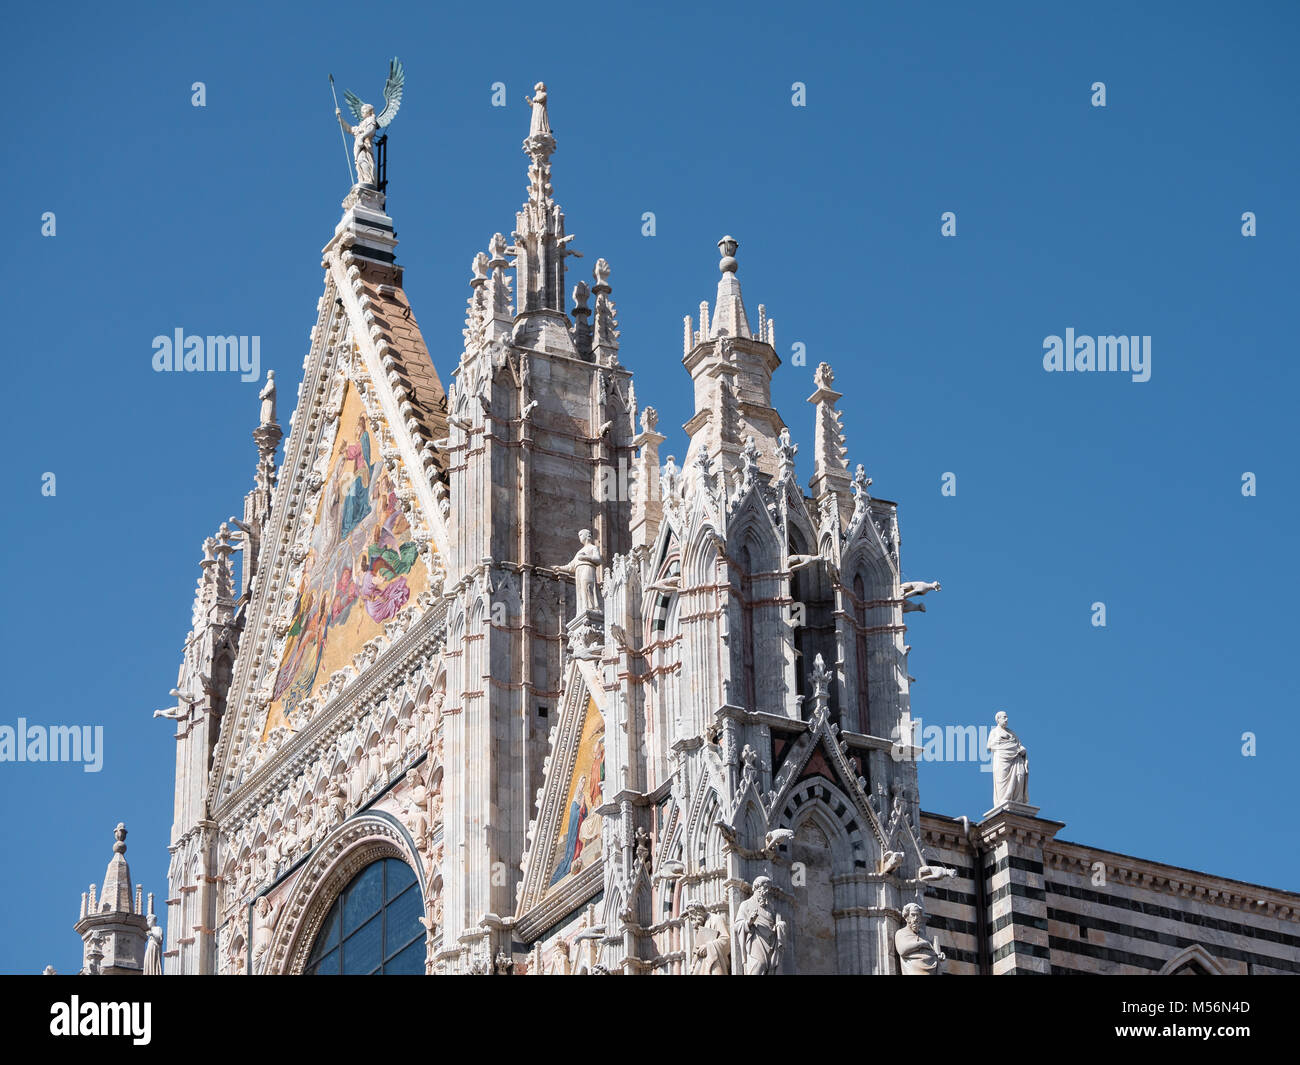 Exterior of the Cathedral of Siena showing the mosaics at the top of the west facade and scupltutes of philosophers, saints and other intricate decora Stock Photo